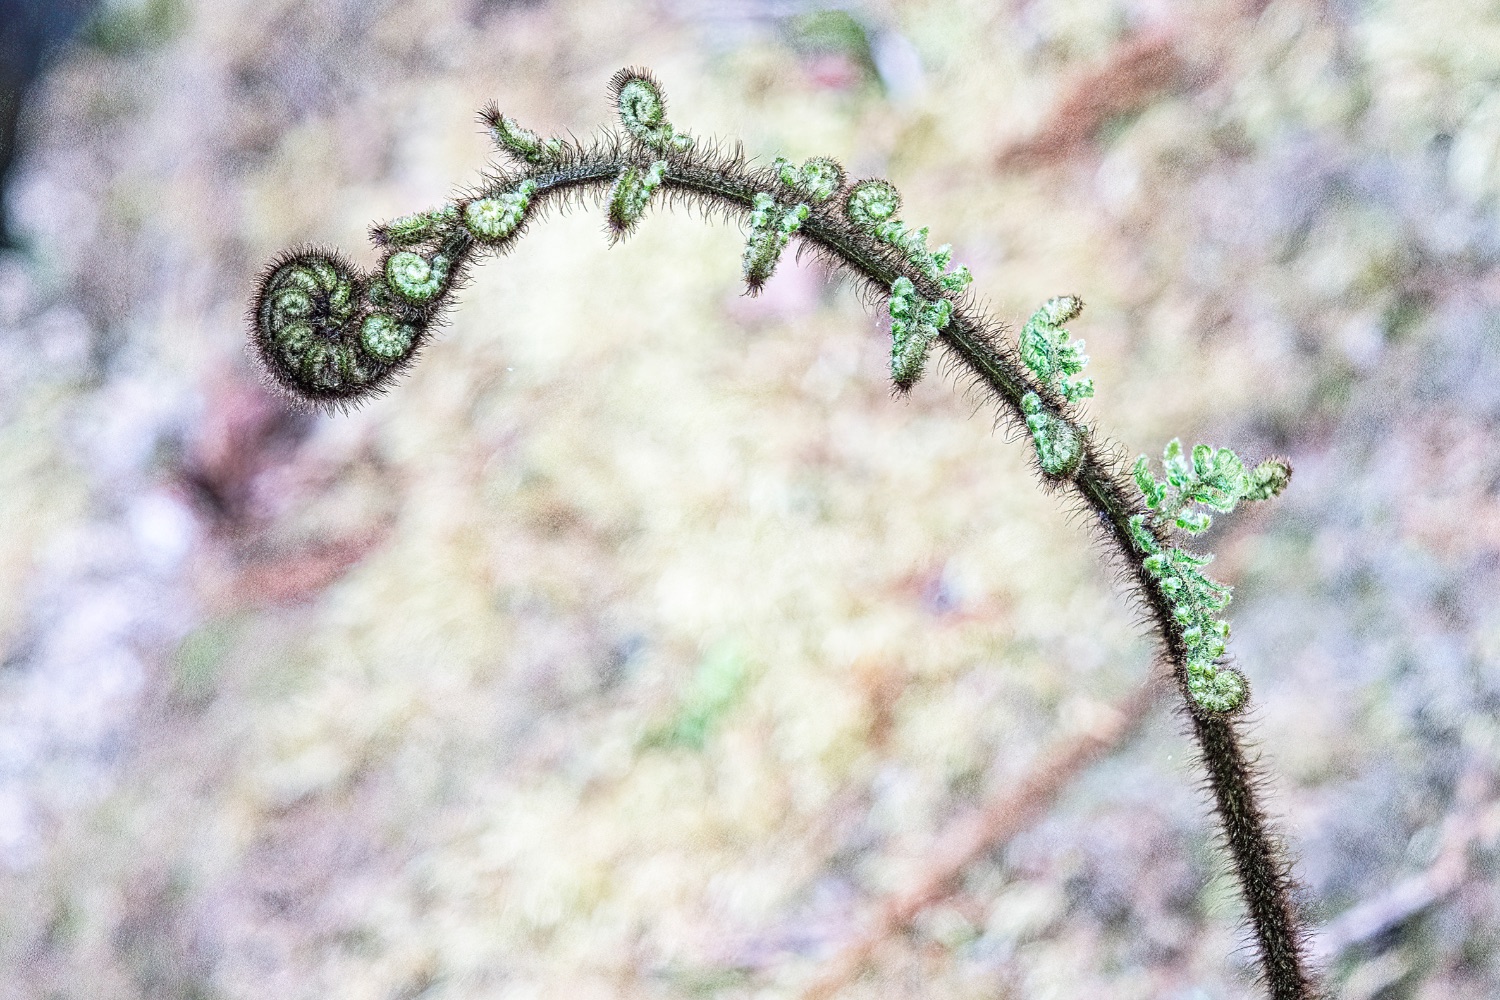 Trail to Lake Matheson, sprout of a new fern